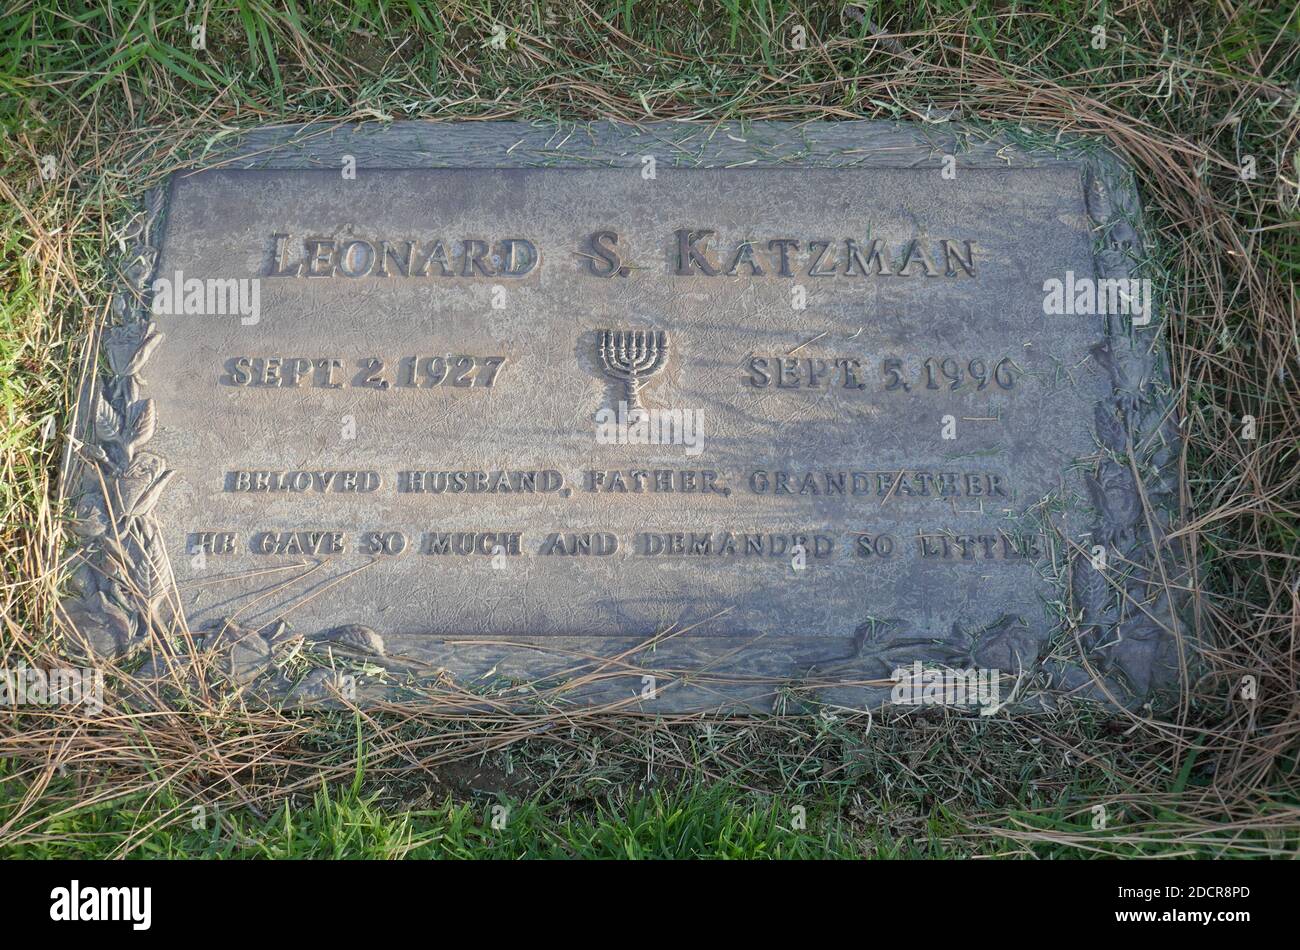 Los Angeles, California, USA 17th November 2020 A general view of atmosphere of producer Leonard Katzman's Grave at Mount Sinai Cemetery Hollywood Hills on November 17, 2020 in Los Angeles, California, USA. Photo by Barry King/Alamy Stock Photo Stock Photo